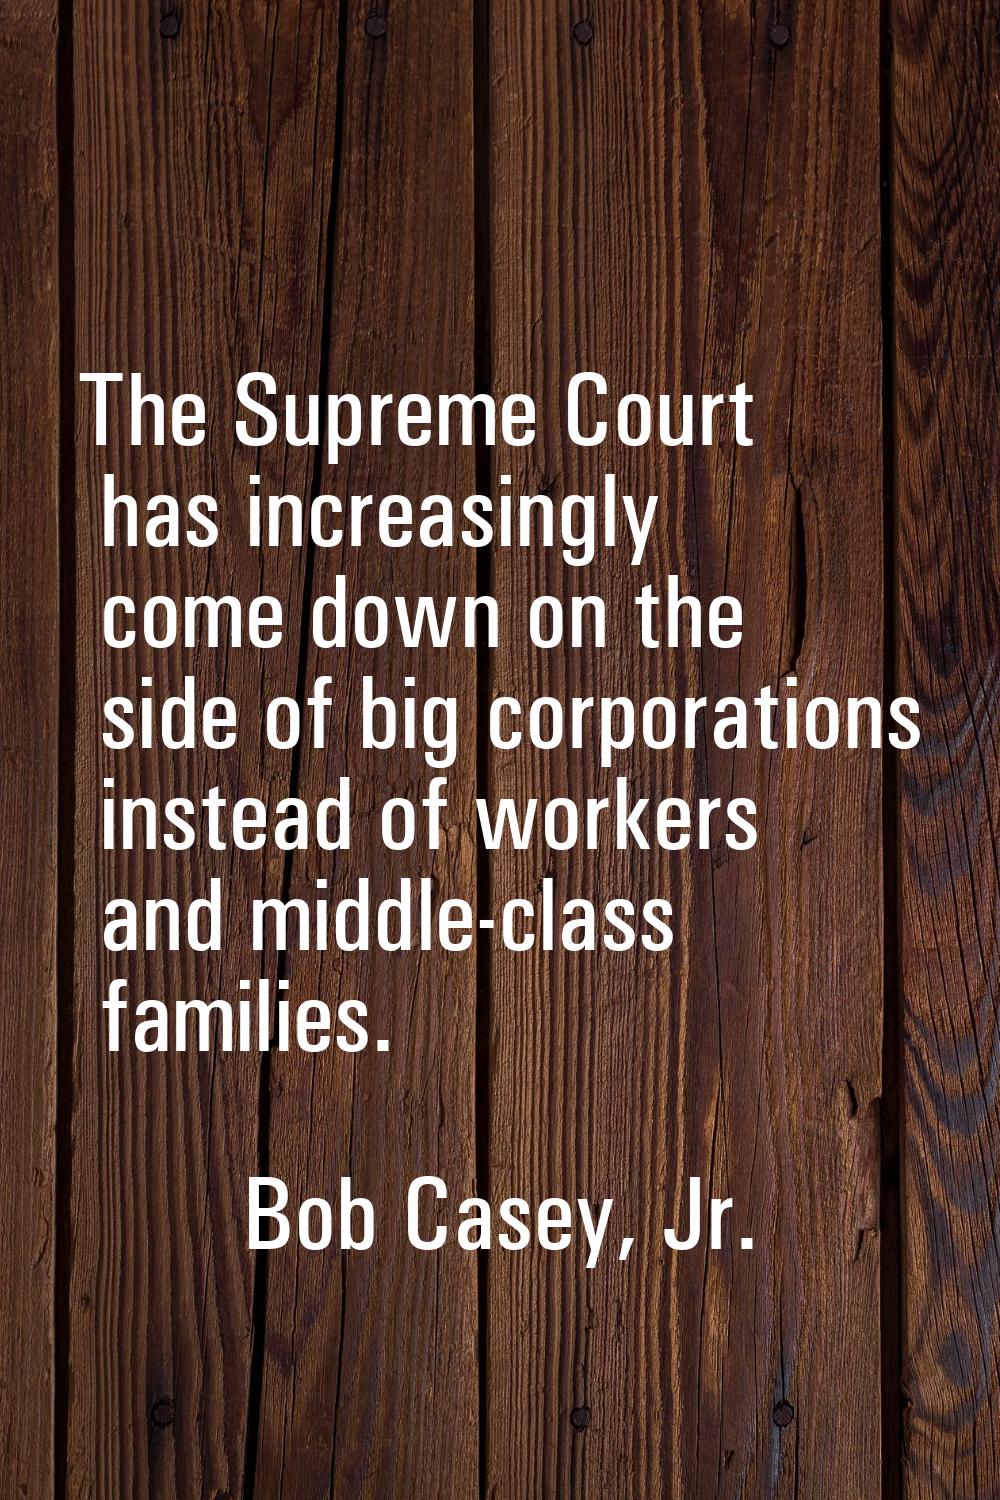 The Supreme Court has increasingly come down on the side of big corporations instead of workers and